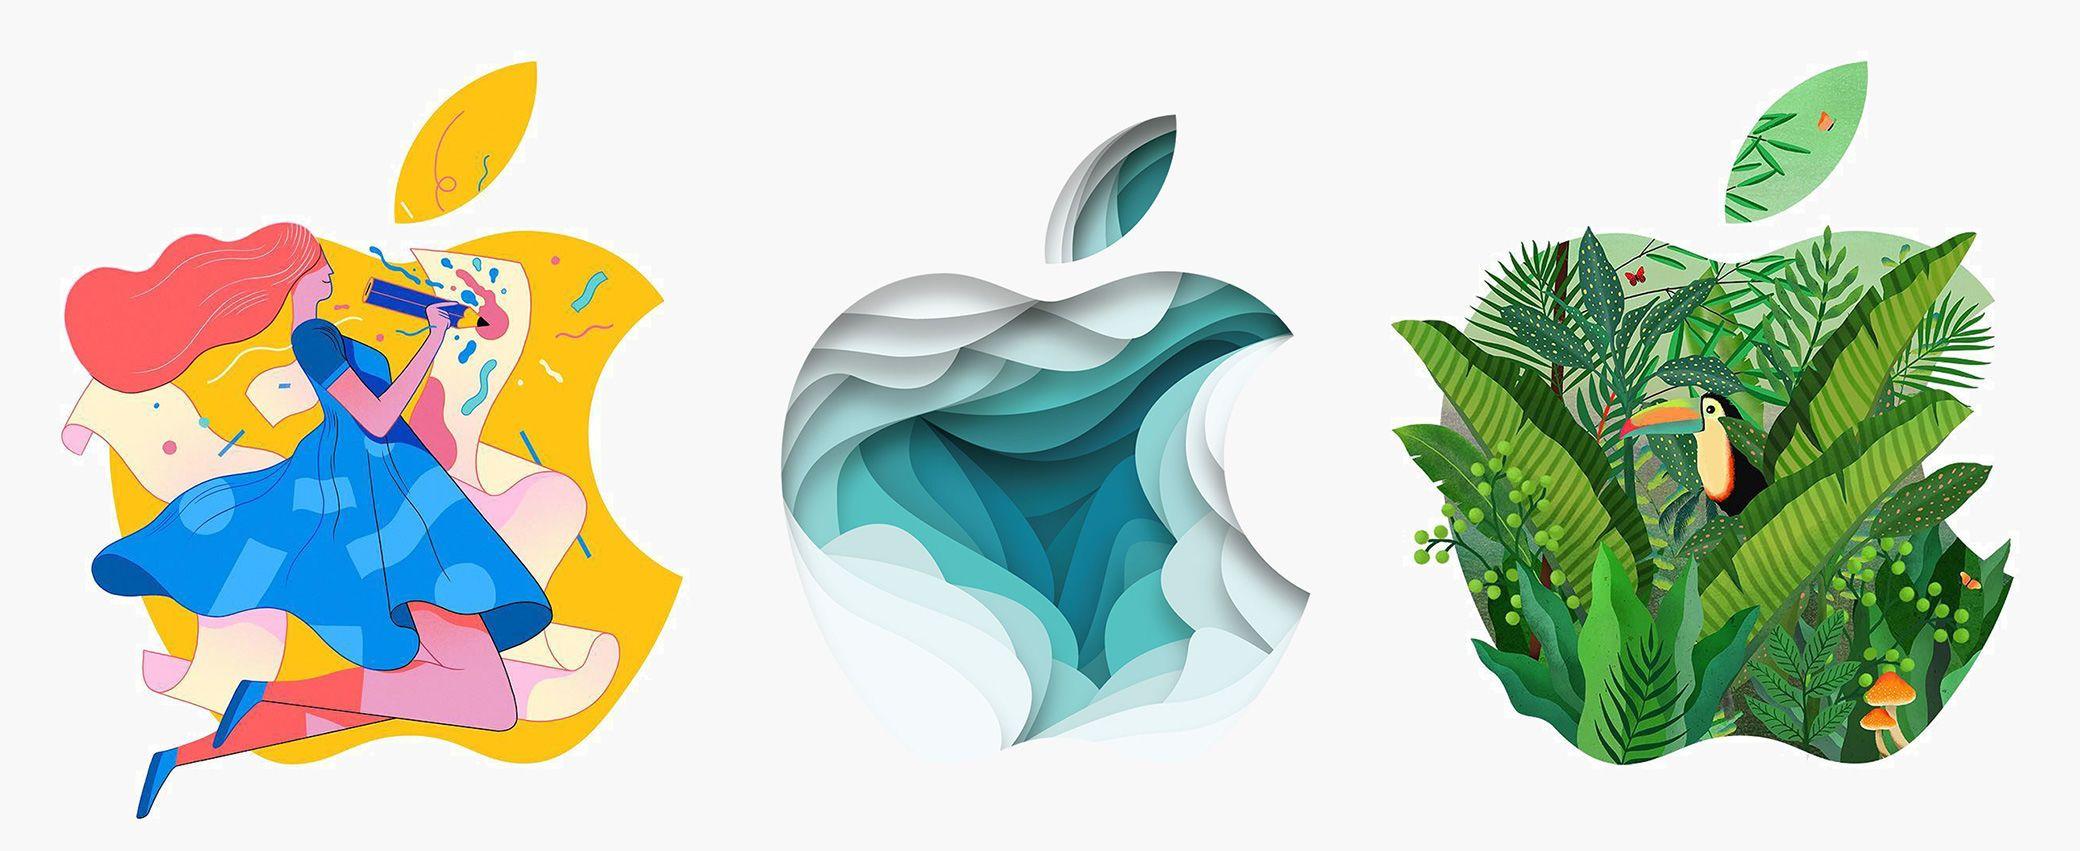 New Apple Logo - These artists reimagined the Apple logo for the new iPad Pro launch